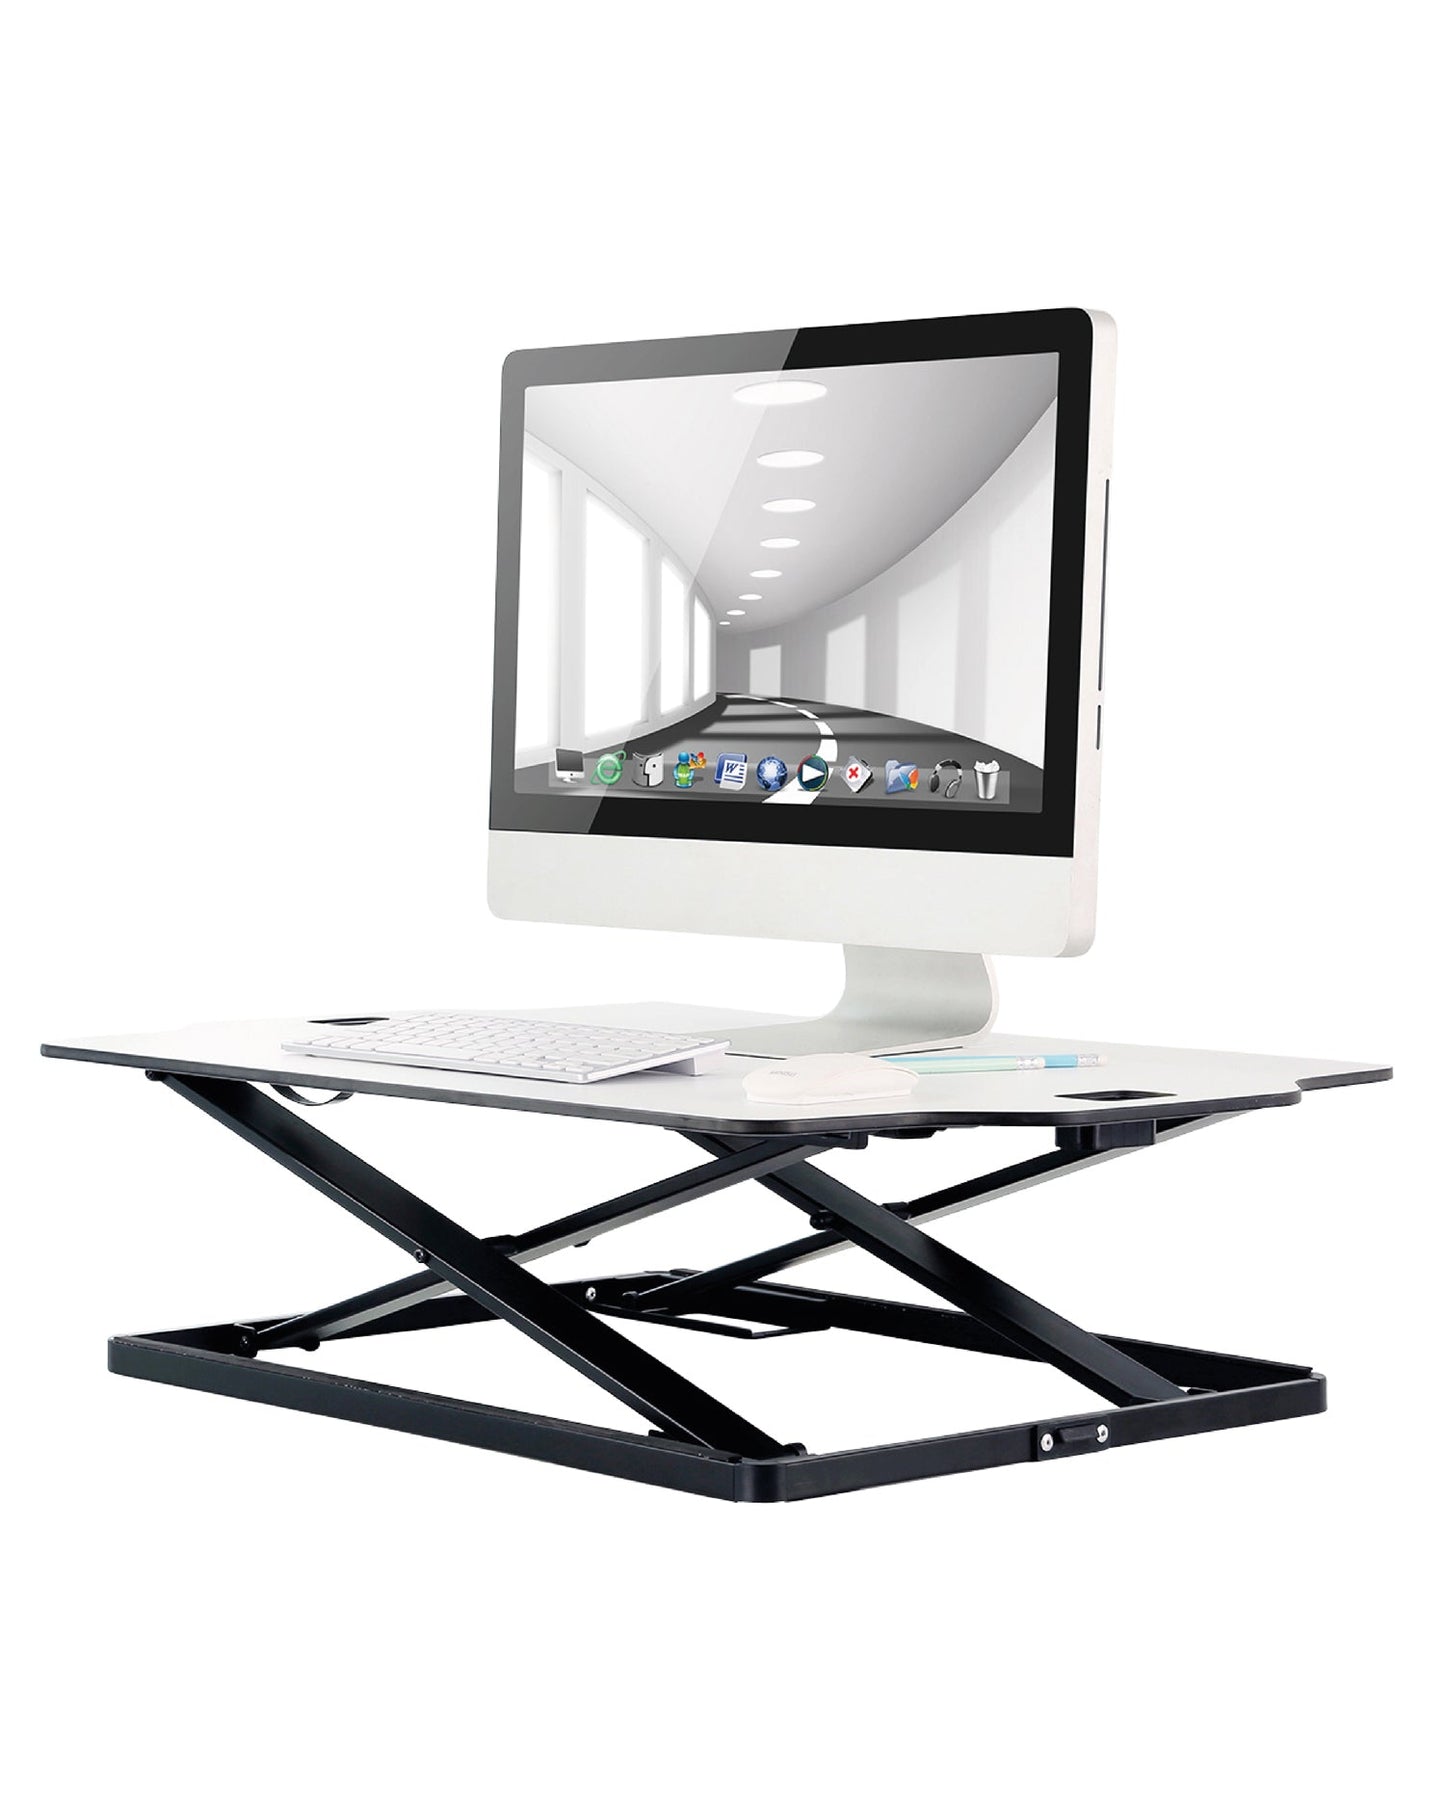 ProperAV Stand Up Desk Converter with Gas Spring Lift & Variable Height Settings - White - maplin.co.uk